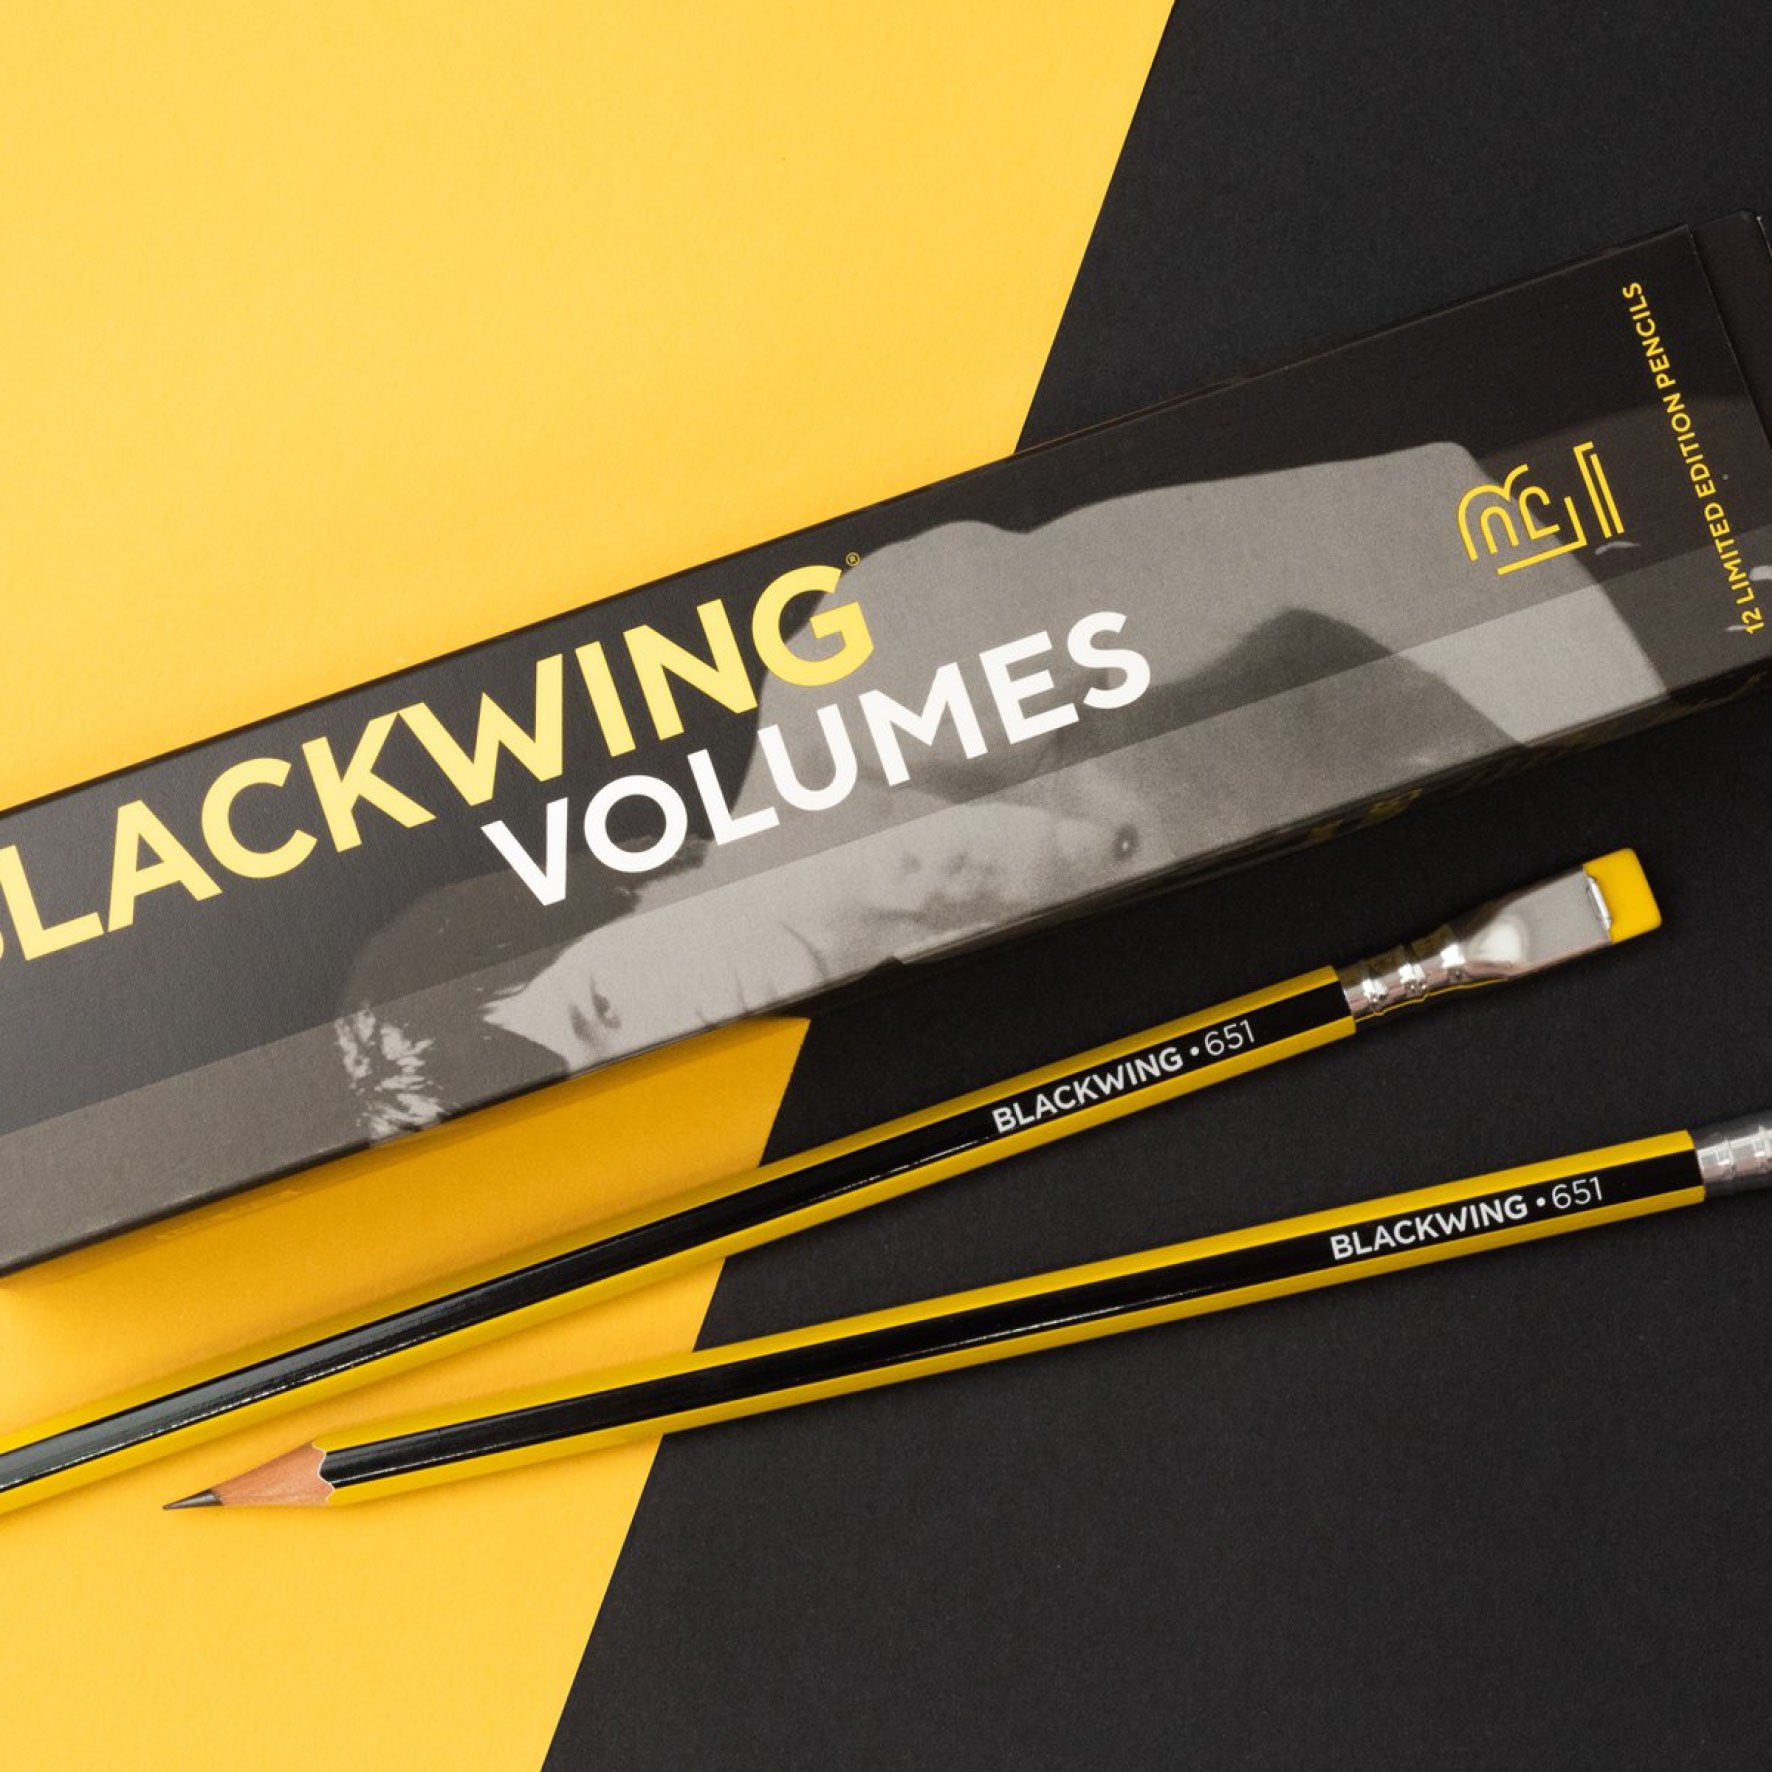 Palomino Blackwing - Pencil - Volume 651 - Pack of 2 (Limited Edition)